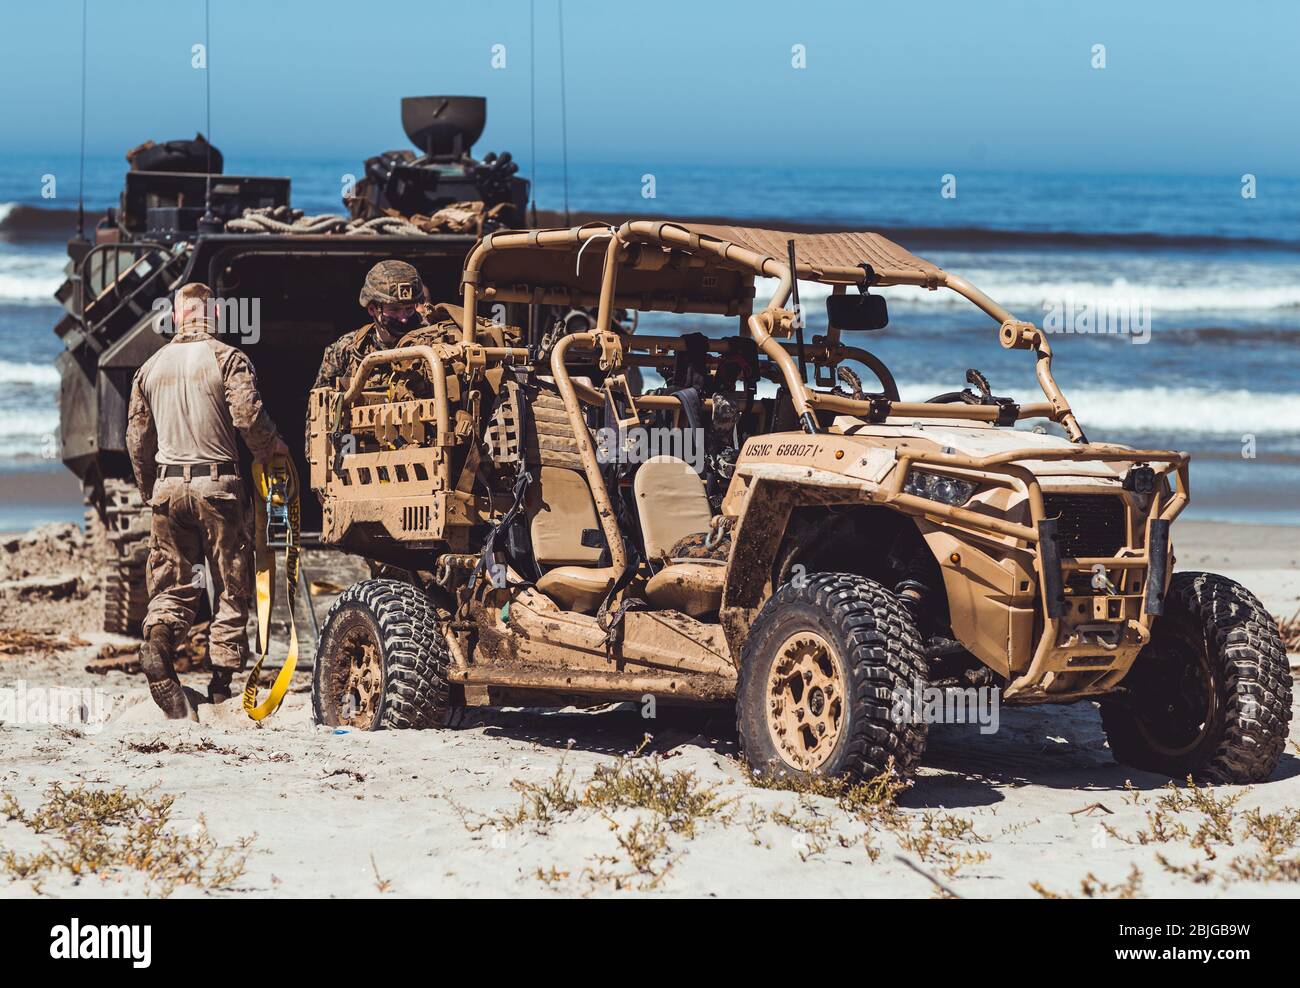 U.S. Marines assigned to I Marine Expeditionary Force Information Group, I Marine Expeditionary Force, prepare to load a Polaris MRZR D4 onto an AAV-7A1 during a field exercise on Marine Corps Base Camp Pendleton, California, April 23, 2020. The MRZR is designed to rapidly concentrate and disperse forces by providing assault and raid capabilities. (U.S. Marine Corps photo by Sgt. Manuel A. Serrano) Stock Photo